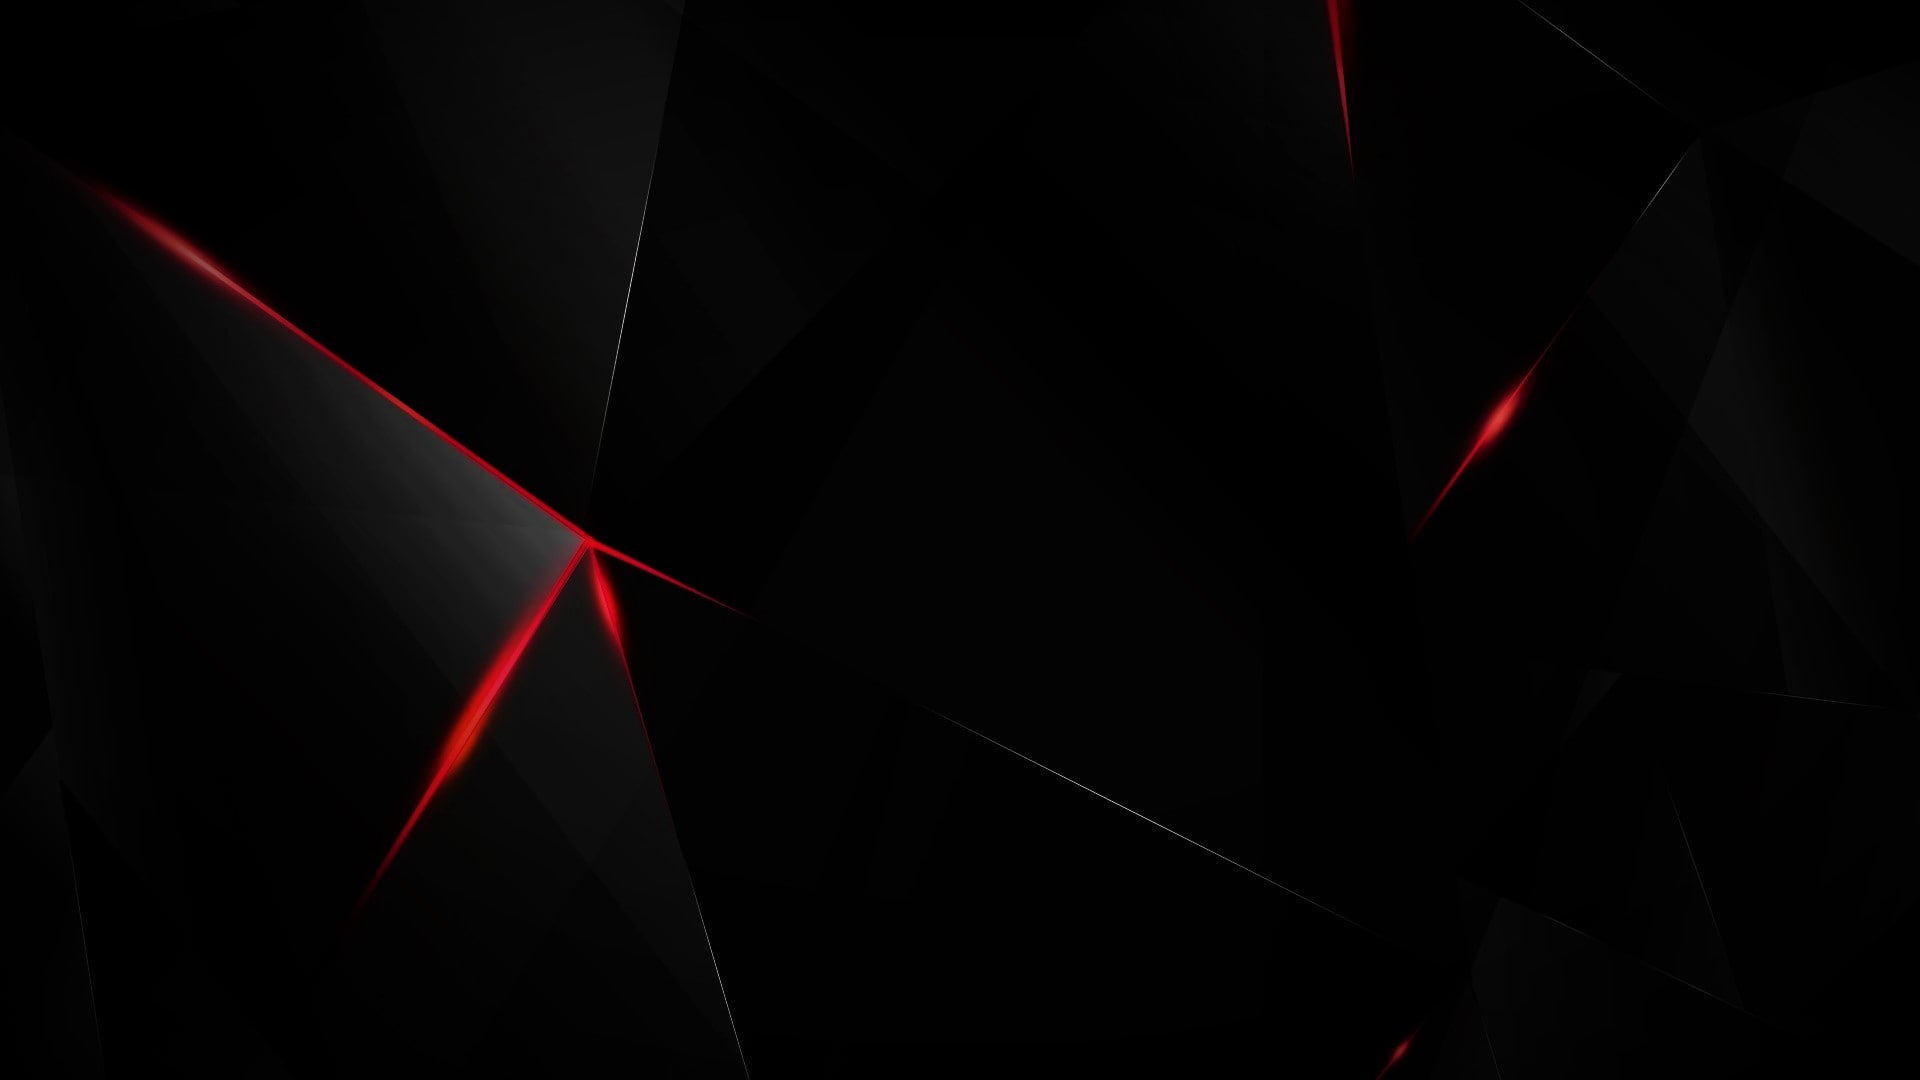 dark, 3D, red, shards, black, glass, abstract